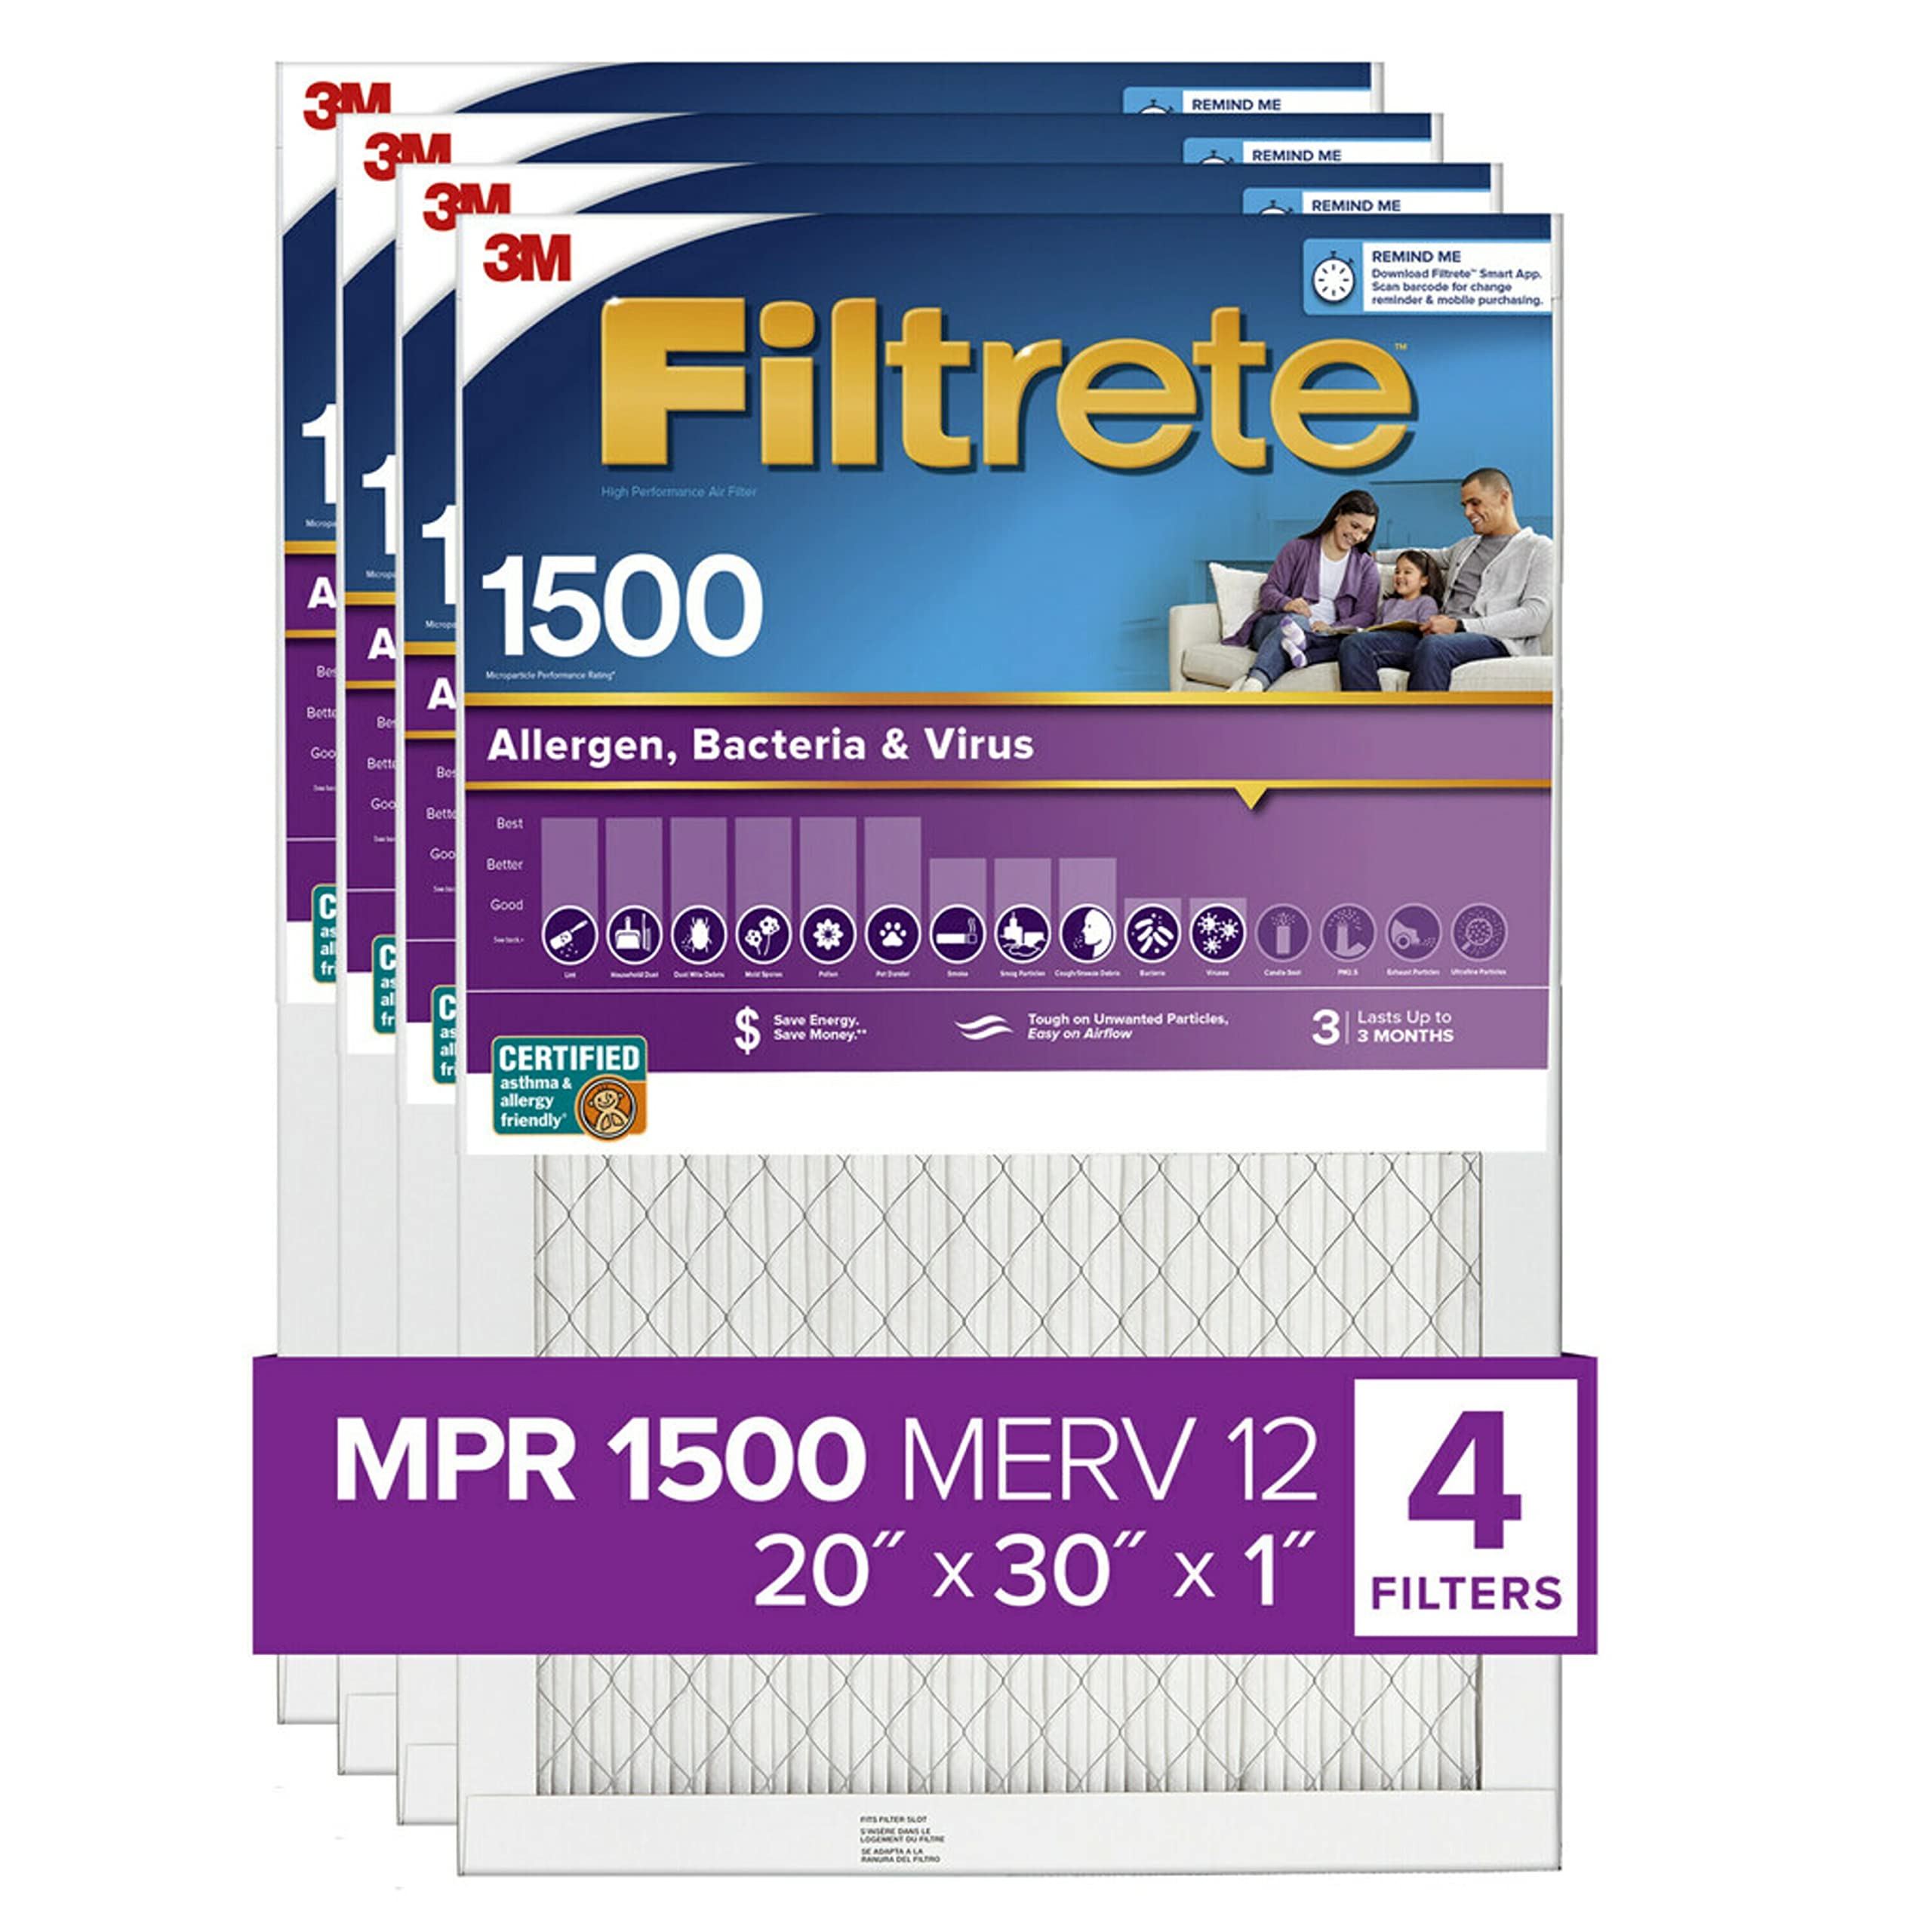 Filtrete 20x30x1 Air Filter, MPR 1500, MERV 12, Healthy Living Ultra-Allergen 3-Month Pleated 1-Inch Air Filters, 4 Filters